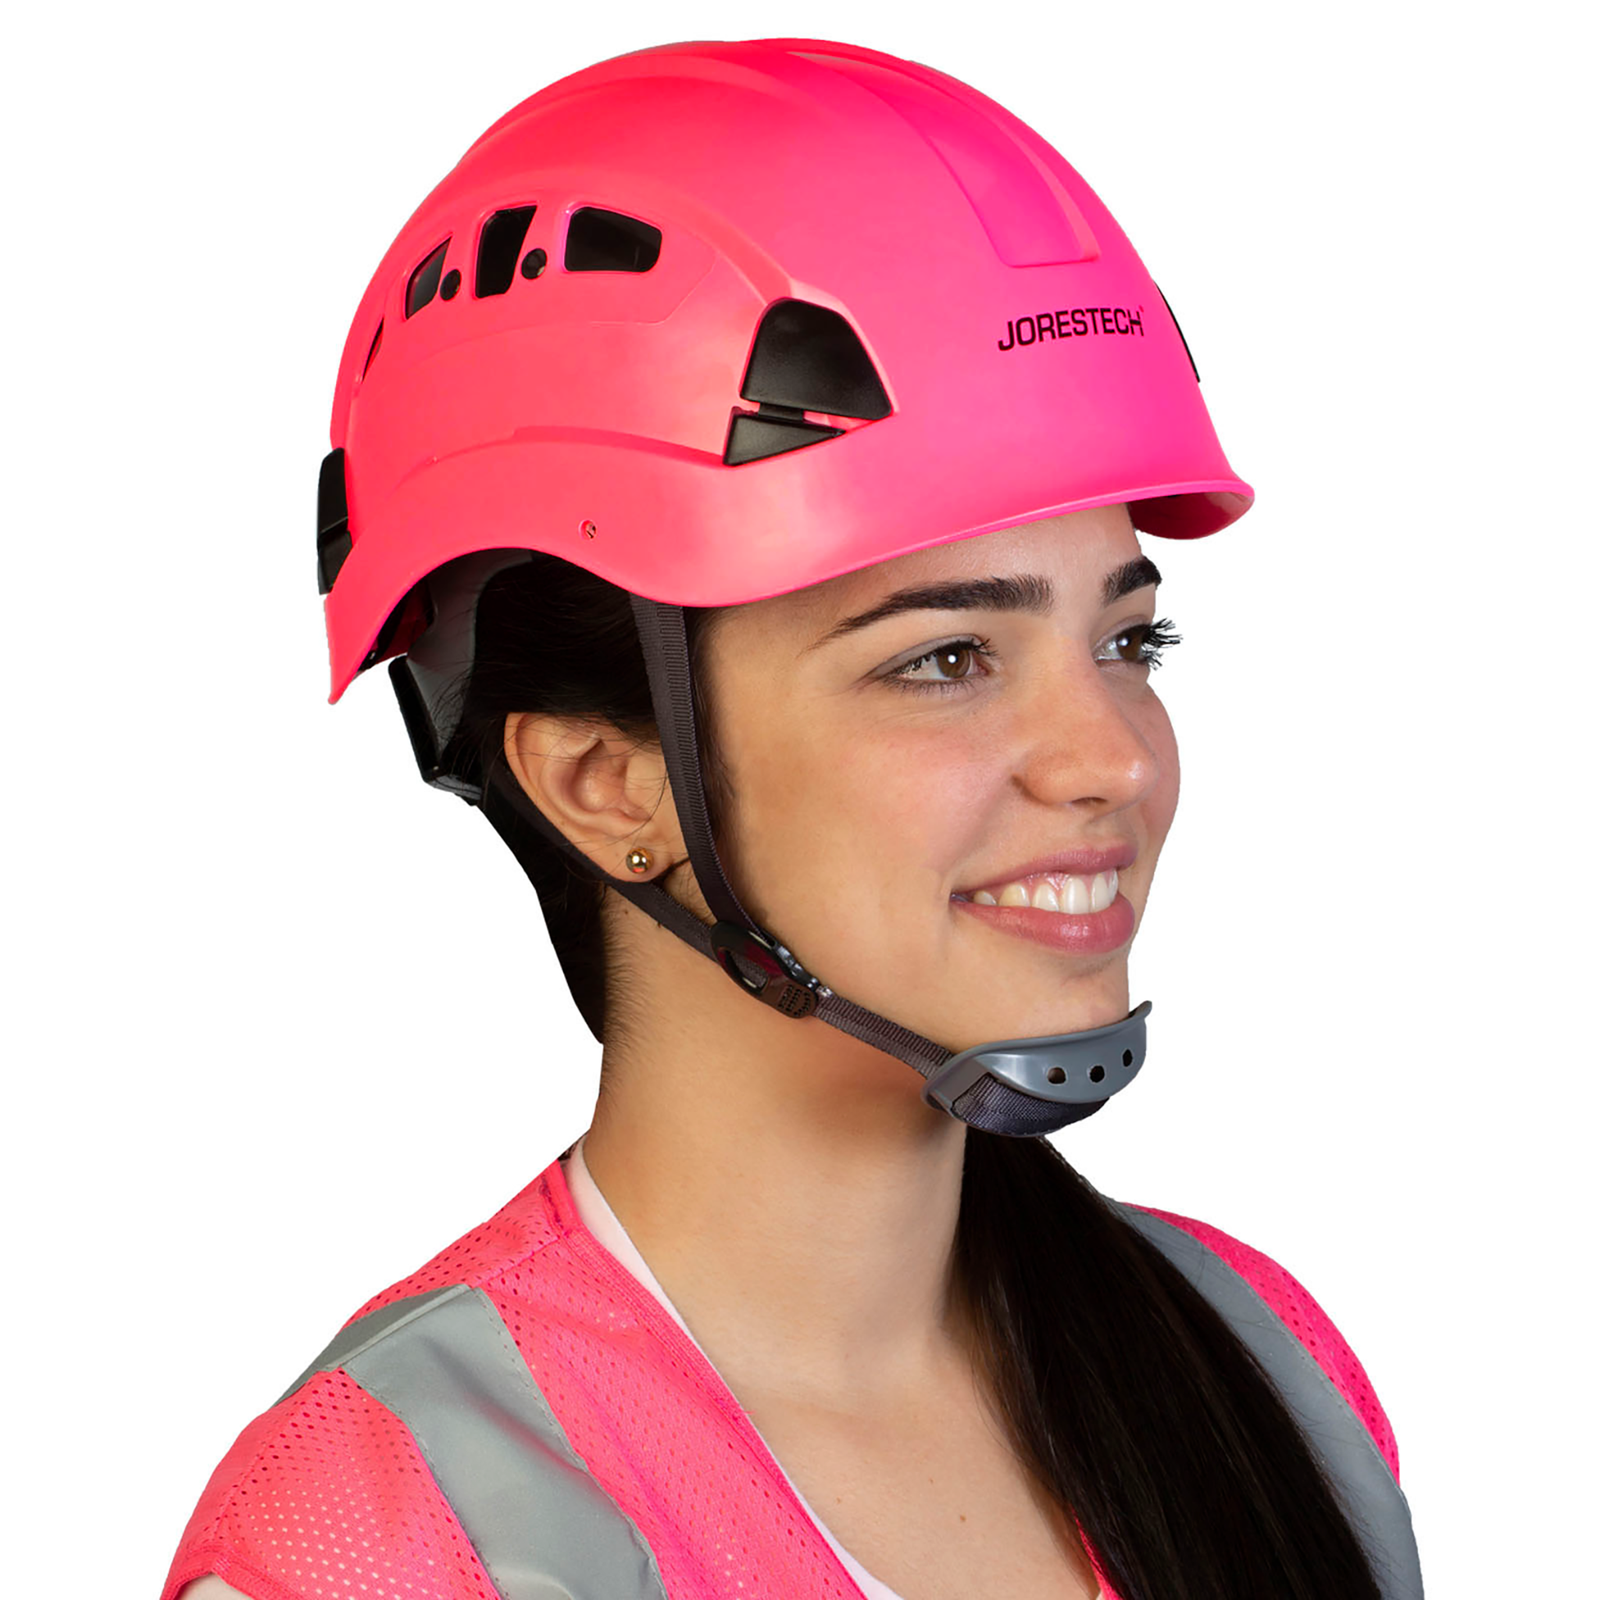 Lady wearing the ANSI  tested and marked ventilated hard hat with 6 point suspension, wheel ratchet adjustment and chin strap.